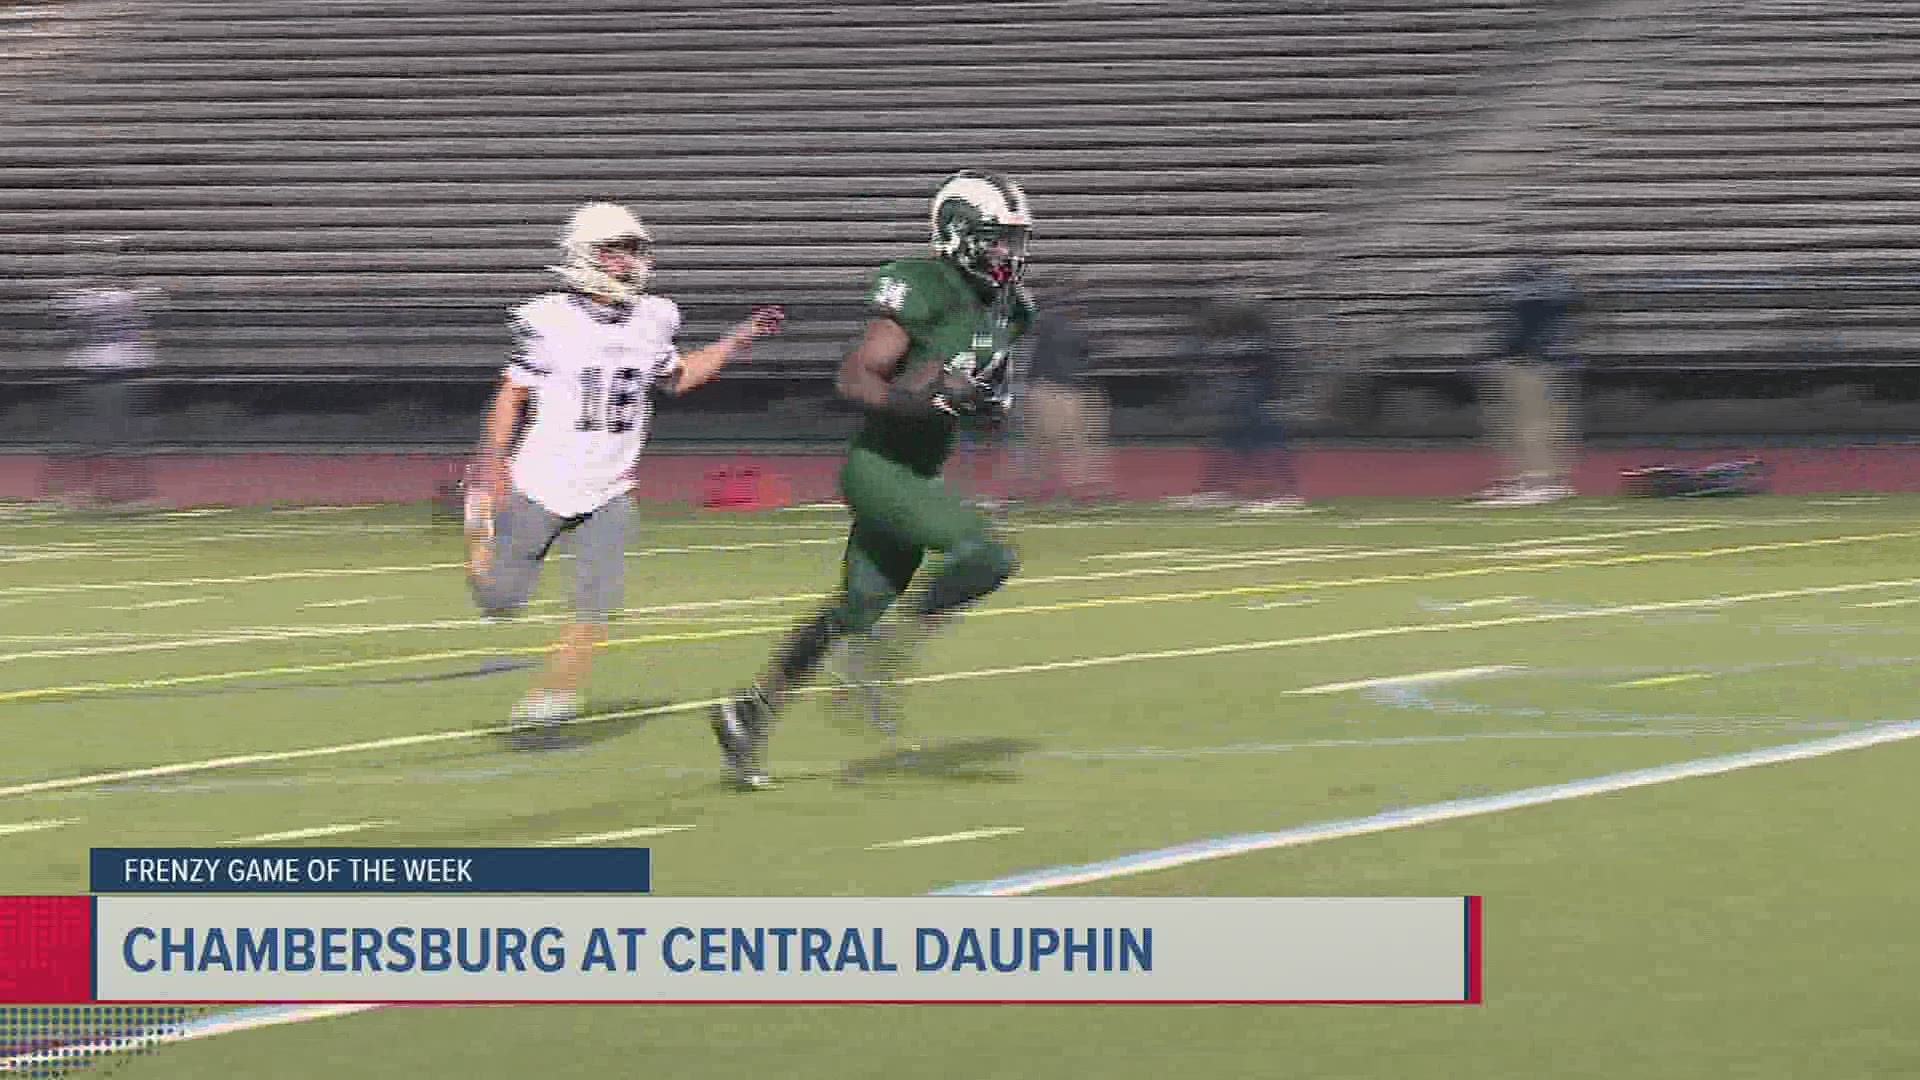 Central Dauphin looks impressive against Chambersburg in 62-10 blowout victory